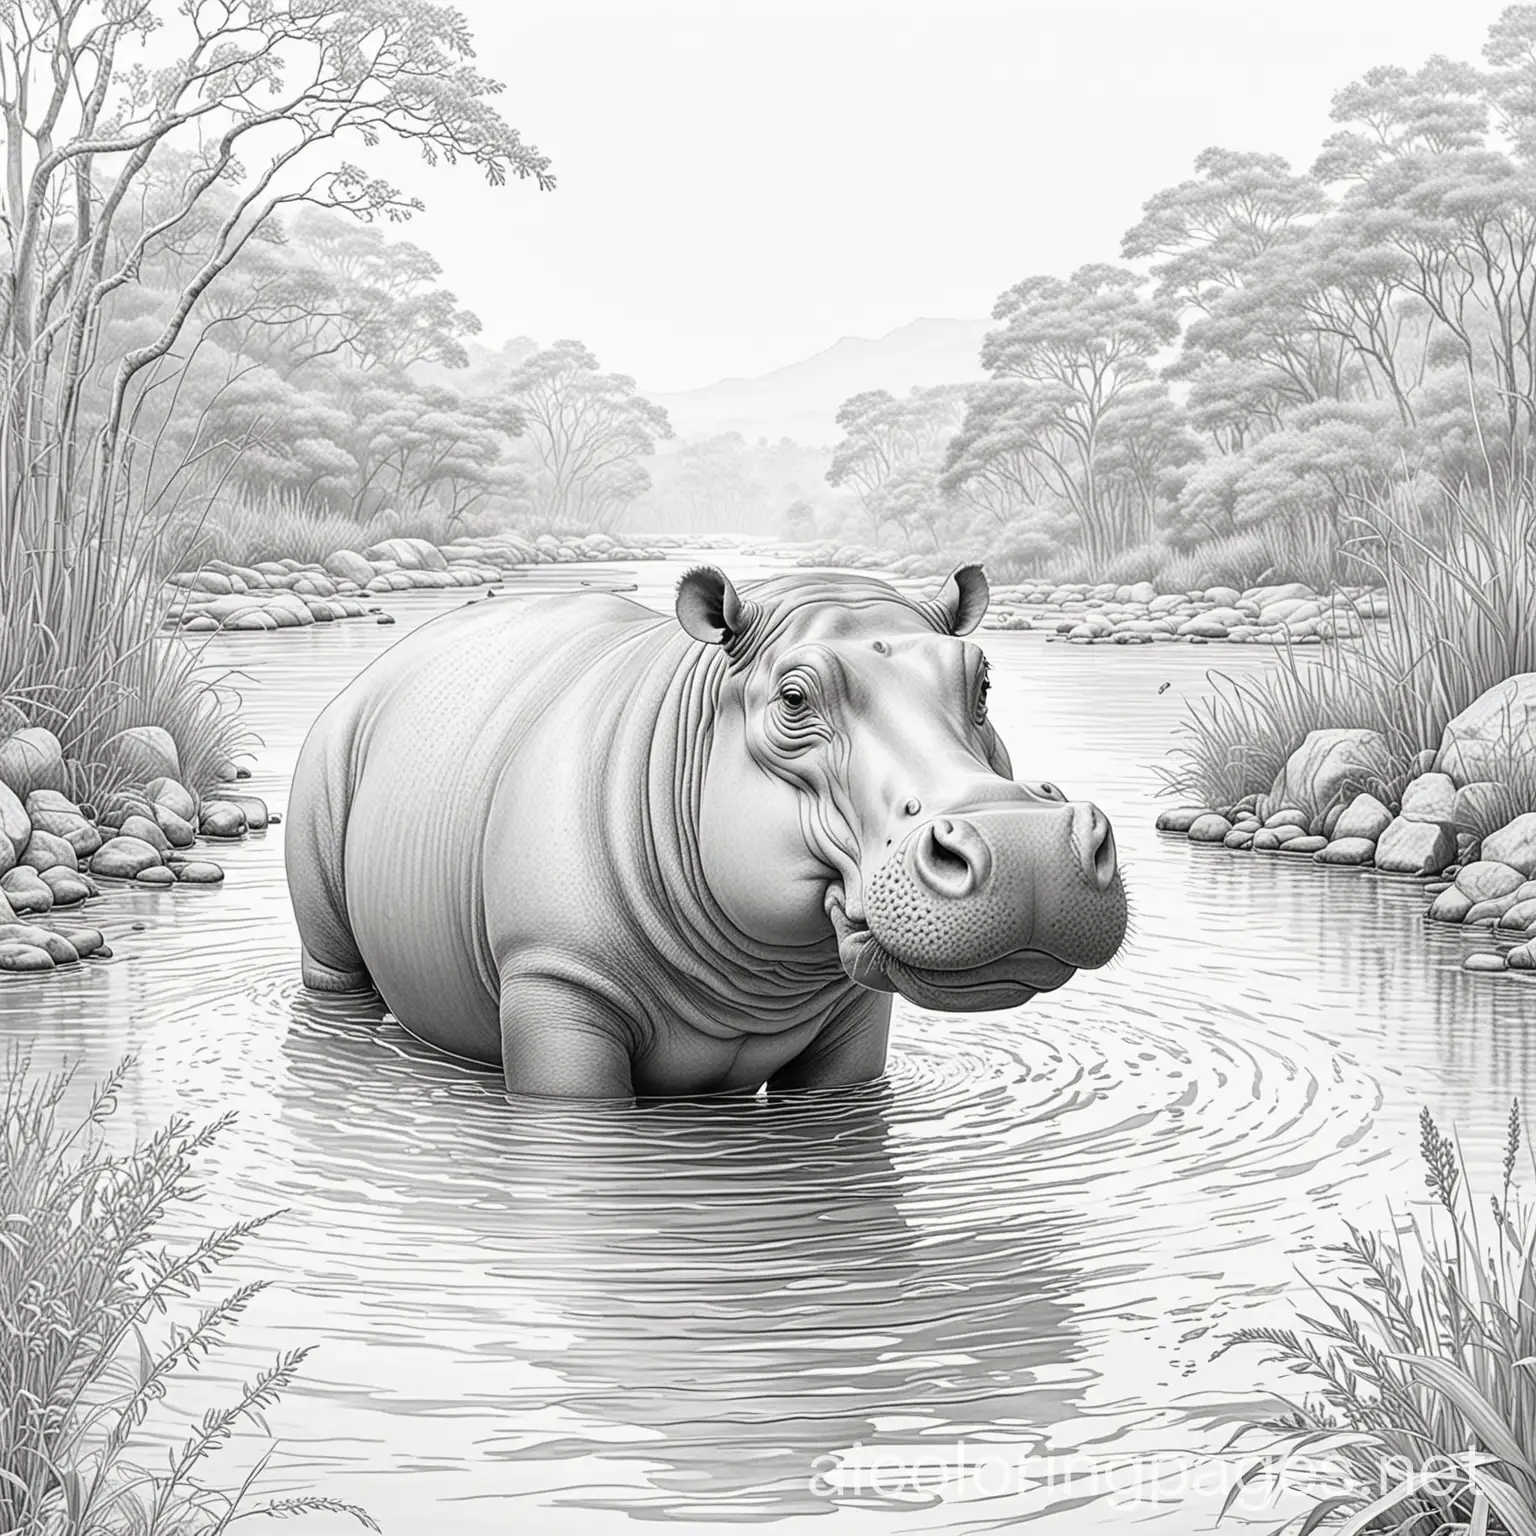 hippo swiming in river in savana
for coloring page, Coloring Page, black and white, line art, white background, Simplicity, Ample White Space. The background of the coloring page is plain white to make it easy for young children to color within the lines. The outlines of all the subjects are easy to distinguish, making it simple for kids to color without too much difficulty